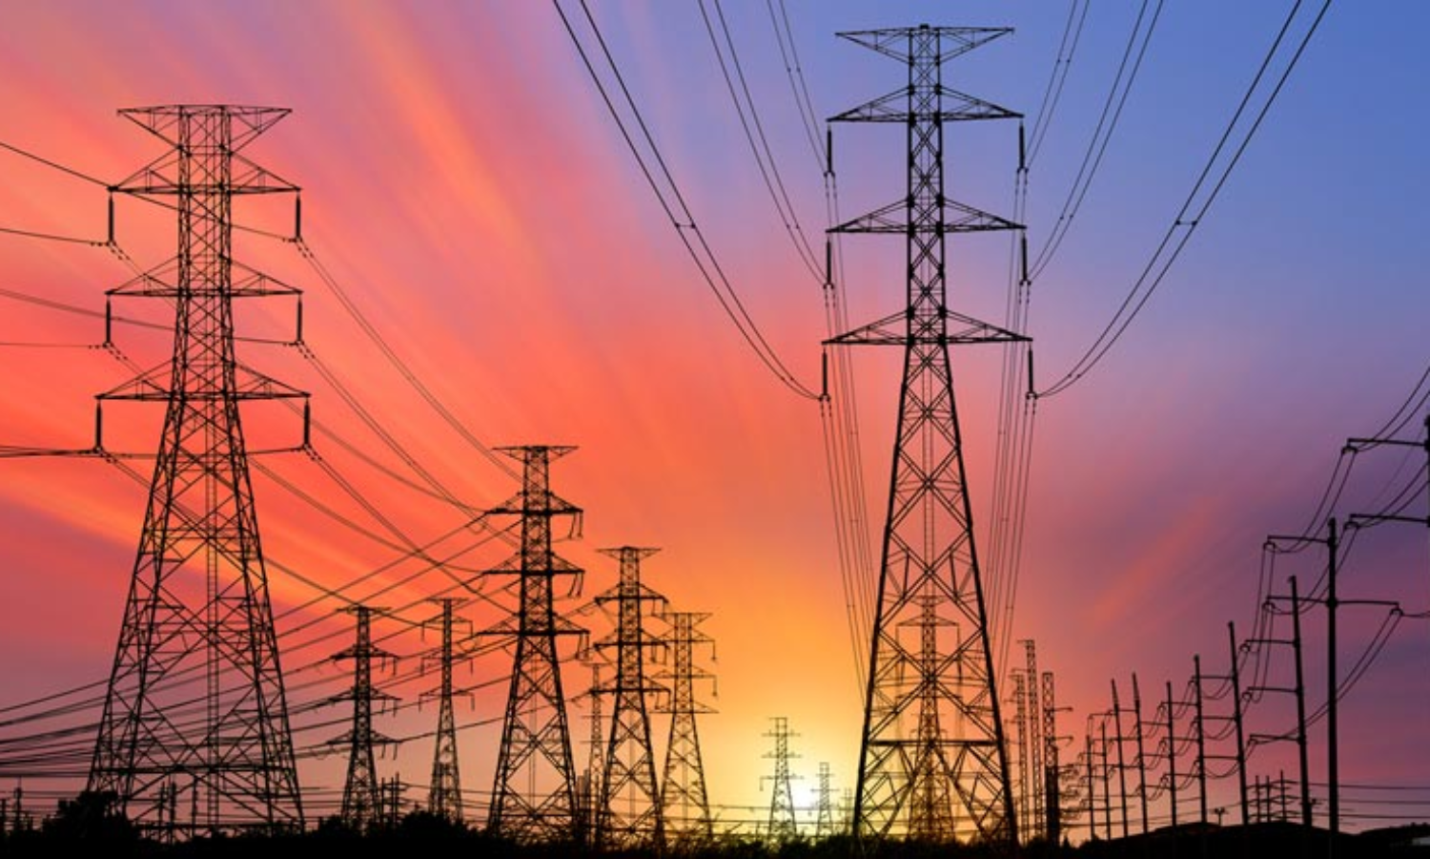 AMENDMENTS TO THE ELECTRICITY (RIGHTS OF CONSUMERS) RULES 2020